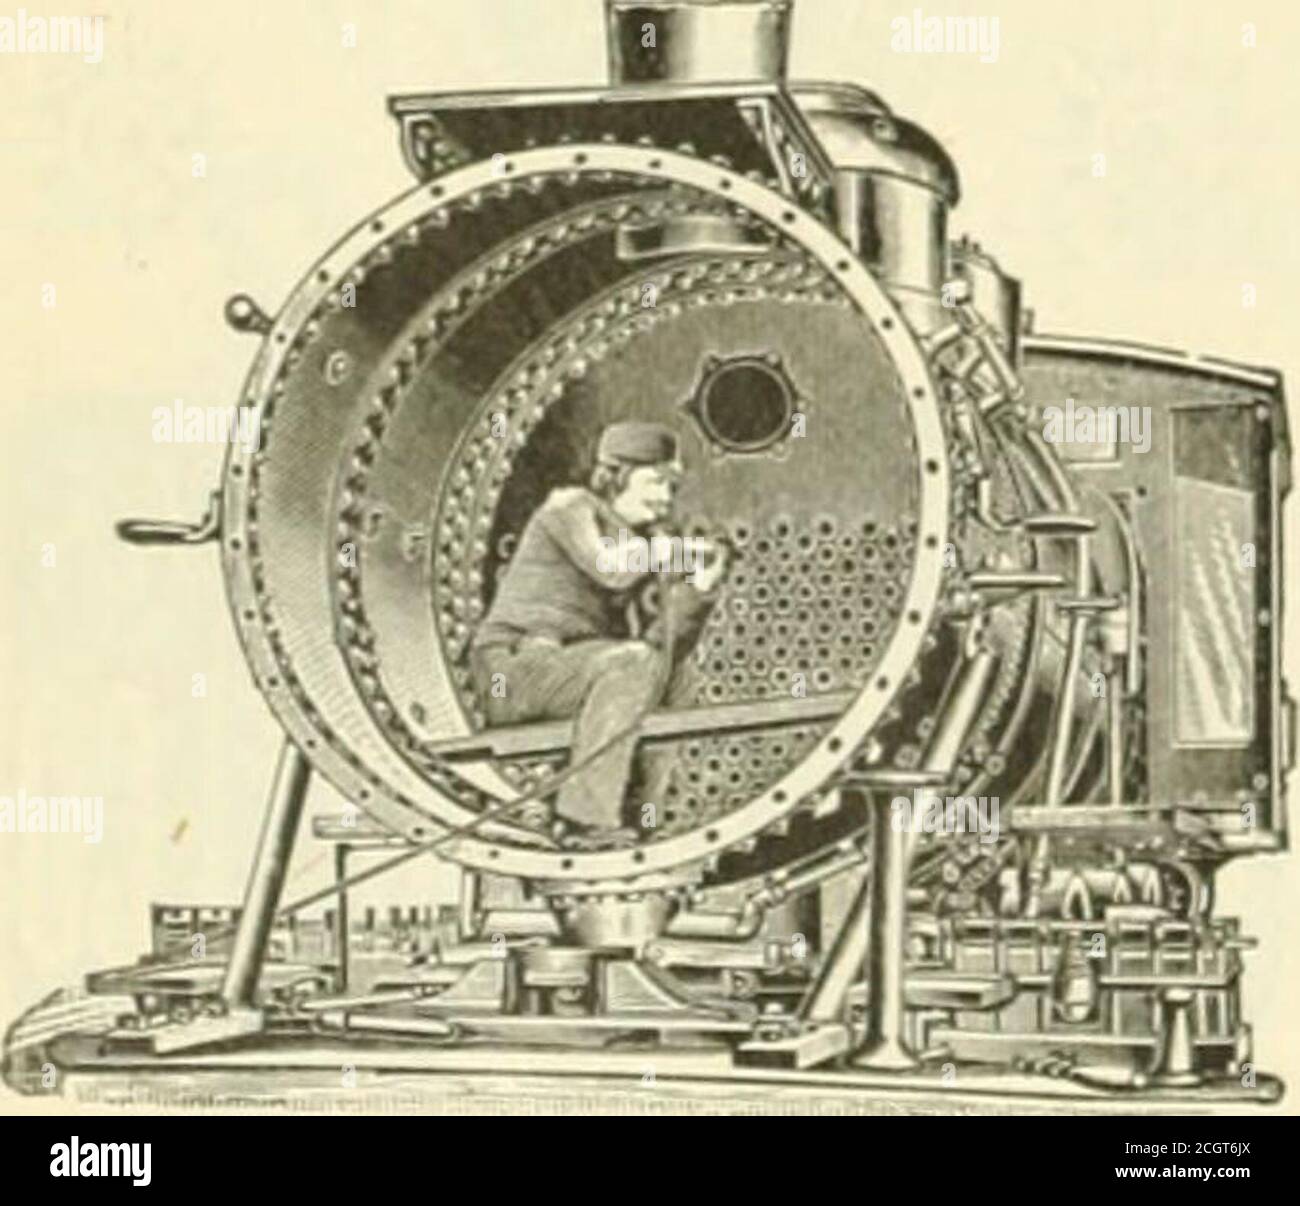 . Locomotive engineering : a practical journal of railway motive power and rolling stock . Ialleable Iron Castings. Sole Manufaclurer^Of / THE JANNEY COUPLER /^ FOR PASStNCtR AND FREIGHT CARS A-//.s/////y//i. 7^/. ^j. Pneumatic Tools. GREAT LABOR-SAVINGDEVICE FOR CALKING BOILERS. BEADING FLUES. HEADING RIVETS, CHIPPING CASTINGS. CUTTING HEY SLOTS, DRIVING NAILS AND SPIKES. KSPECI.M.I.V ADAPTED lOK KAILKOAD SlIolS. •7«7111 to«t.c]. 1-7t7-o ZlU.eis A&gt; IVXinixto. All Hammers sent on ten days trial subject to approval, and guaranteed for one year against repairs. CHICAGO PNEUMATIC TOOL CO., ■ Stock Photo